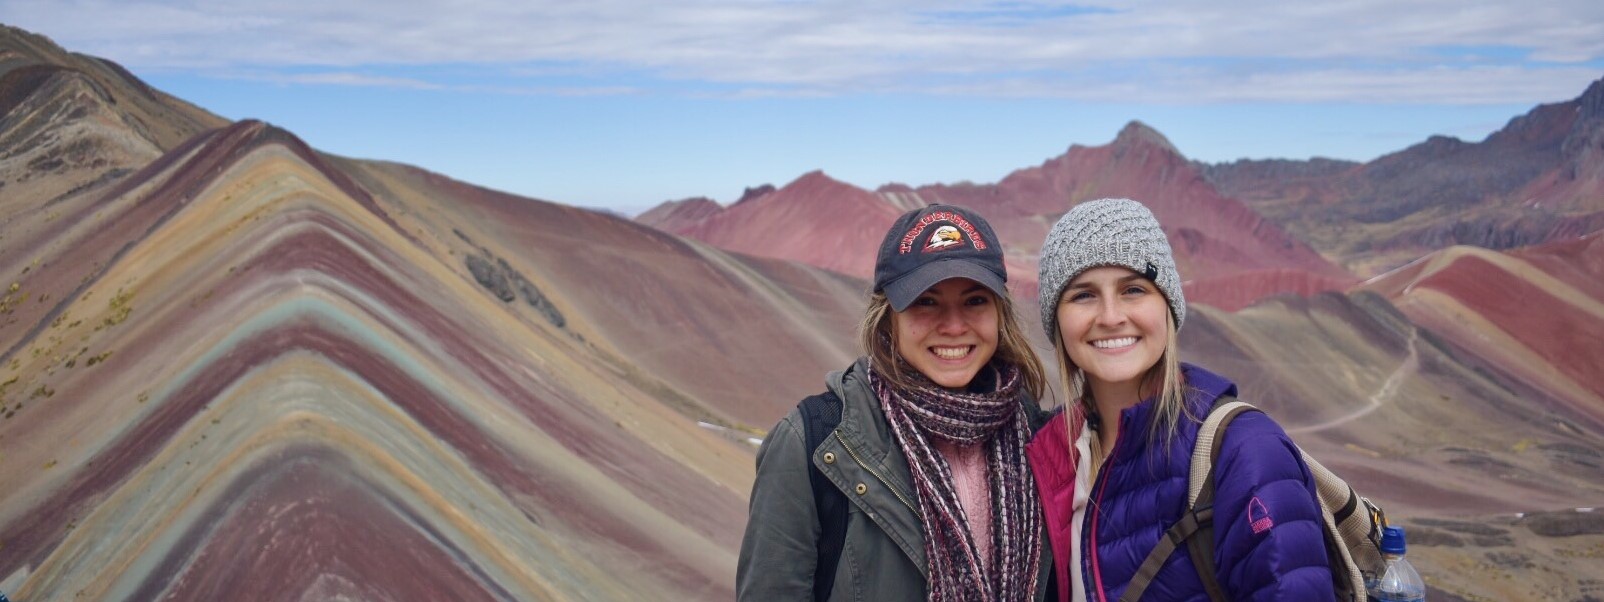 2 girls pictured in front of mountains